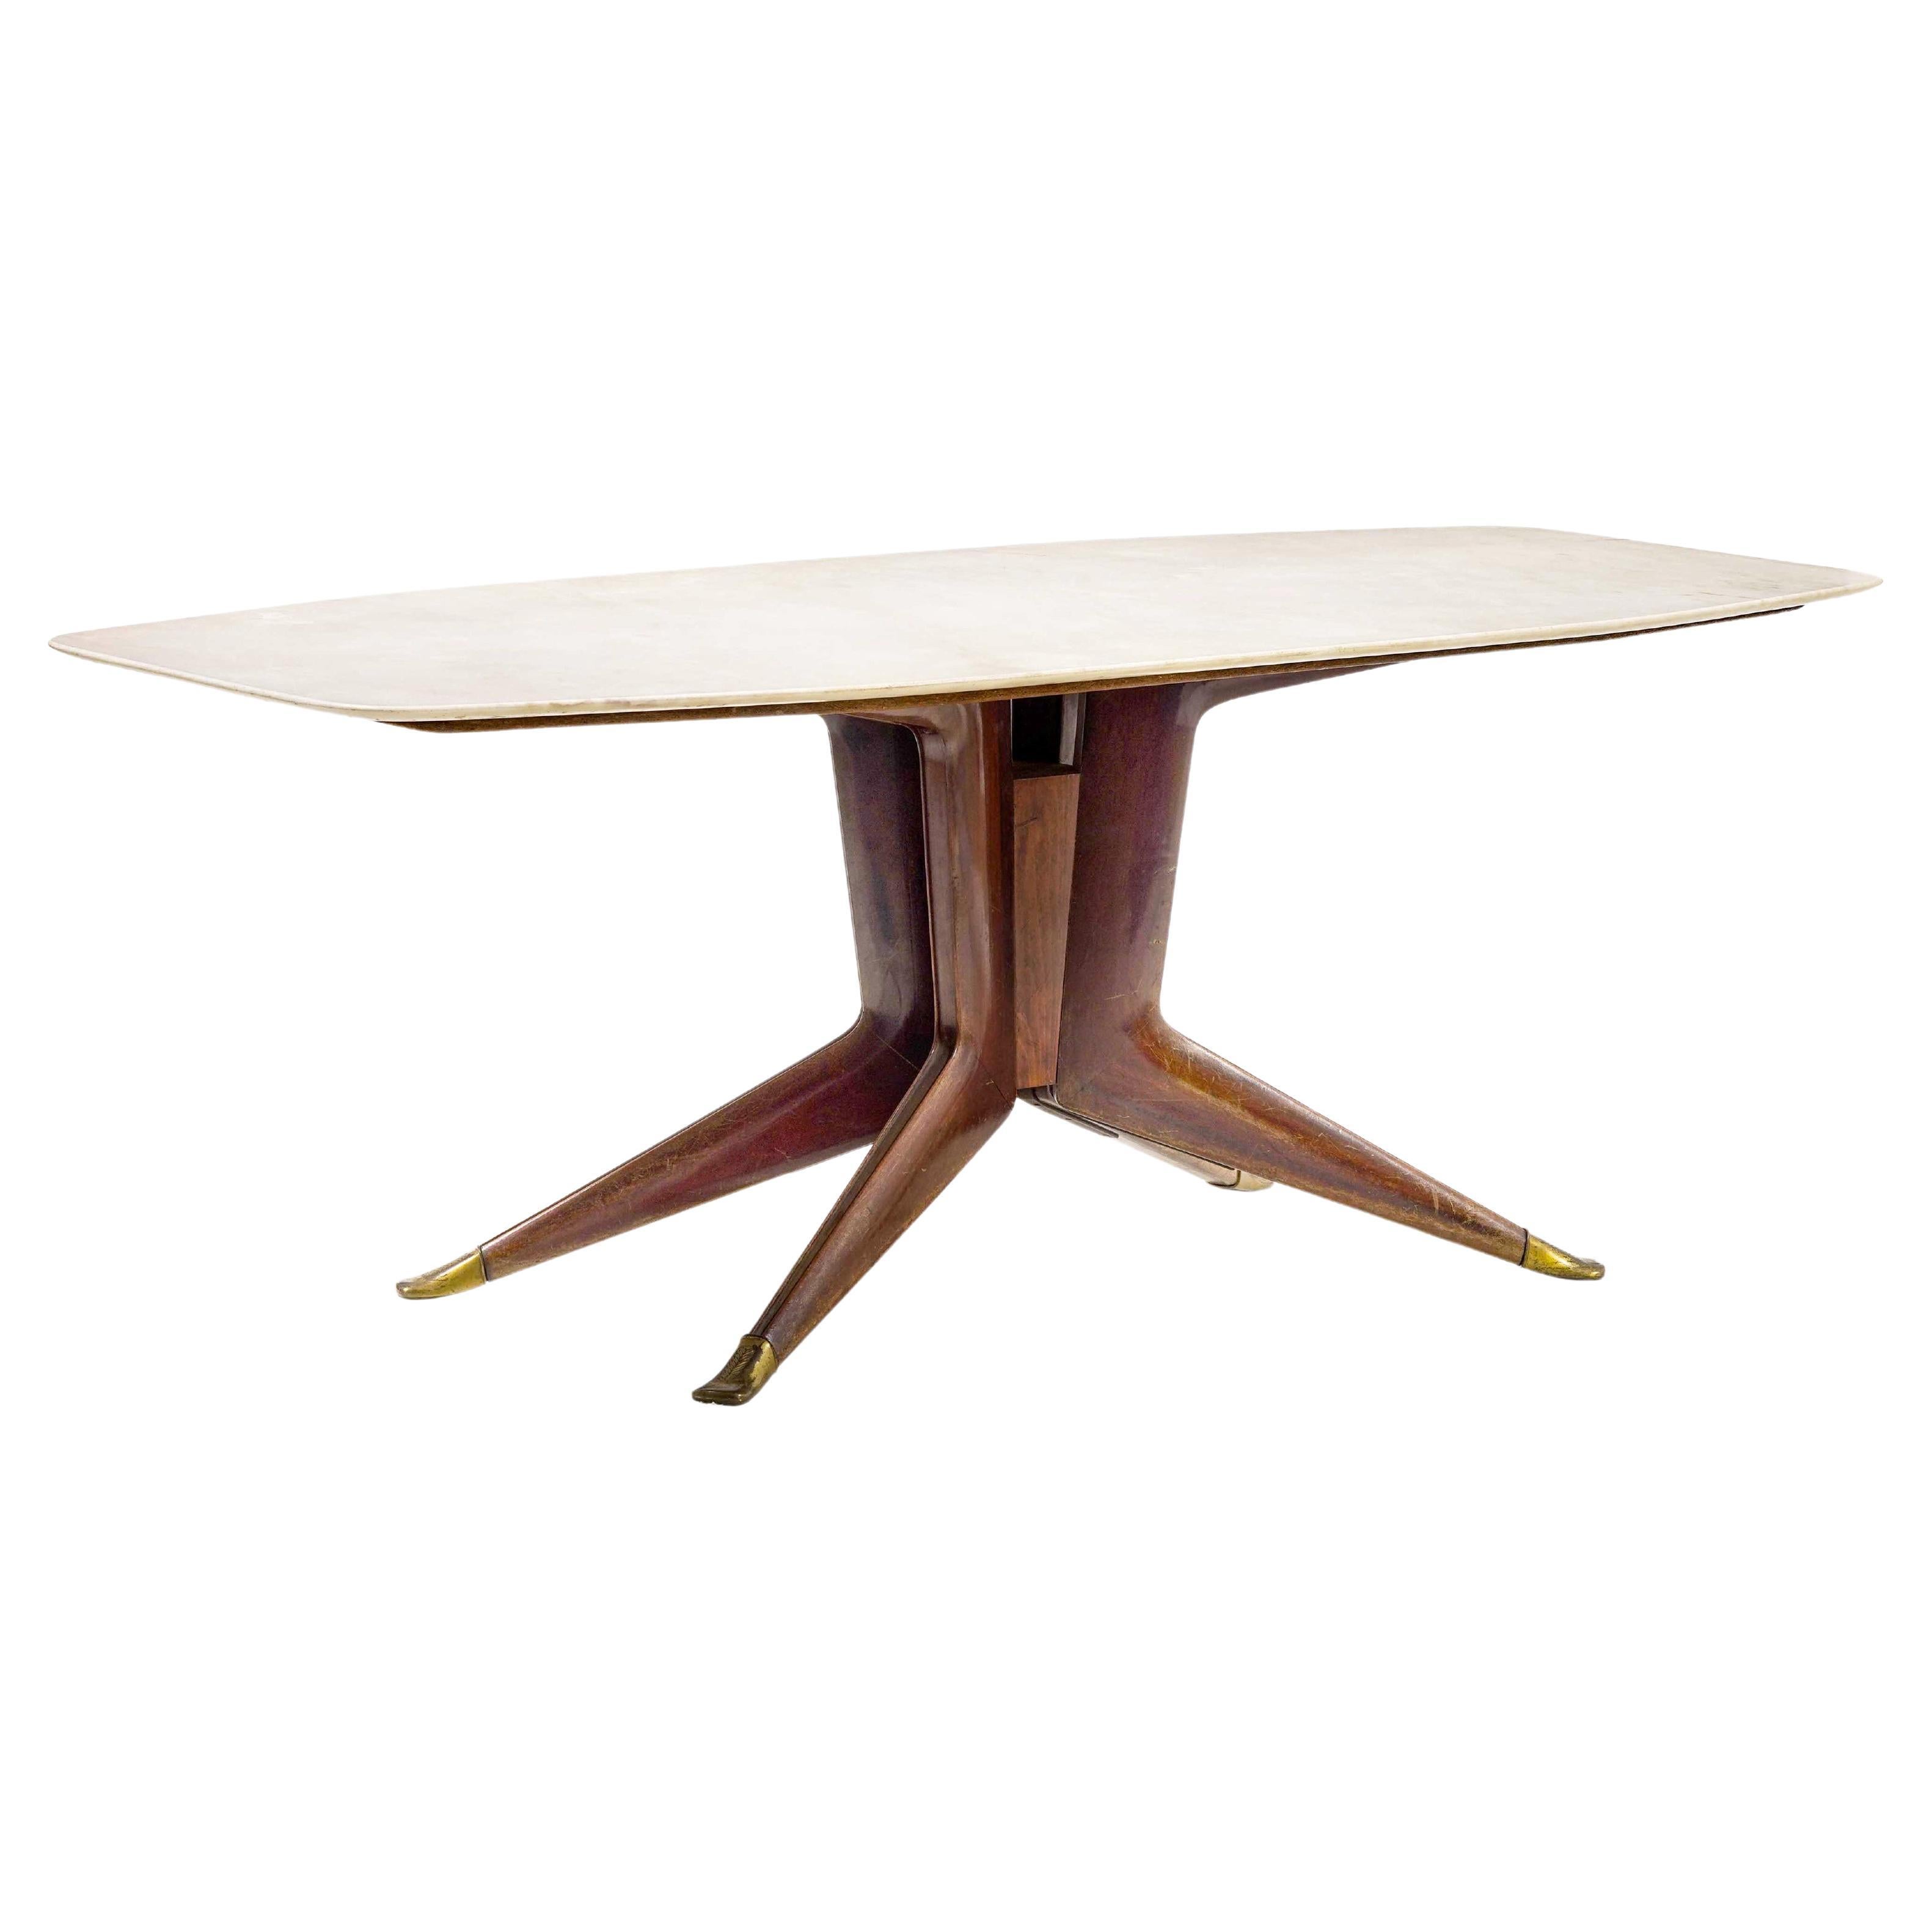 Italian Mid -Century Dining Table with a White Marble Top Attrib. to Ico Parisi 1950s For Sale